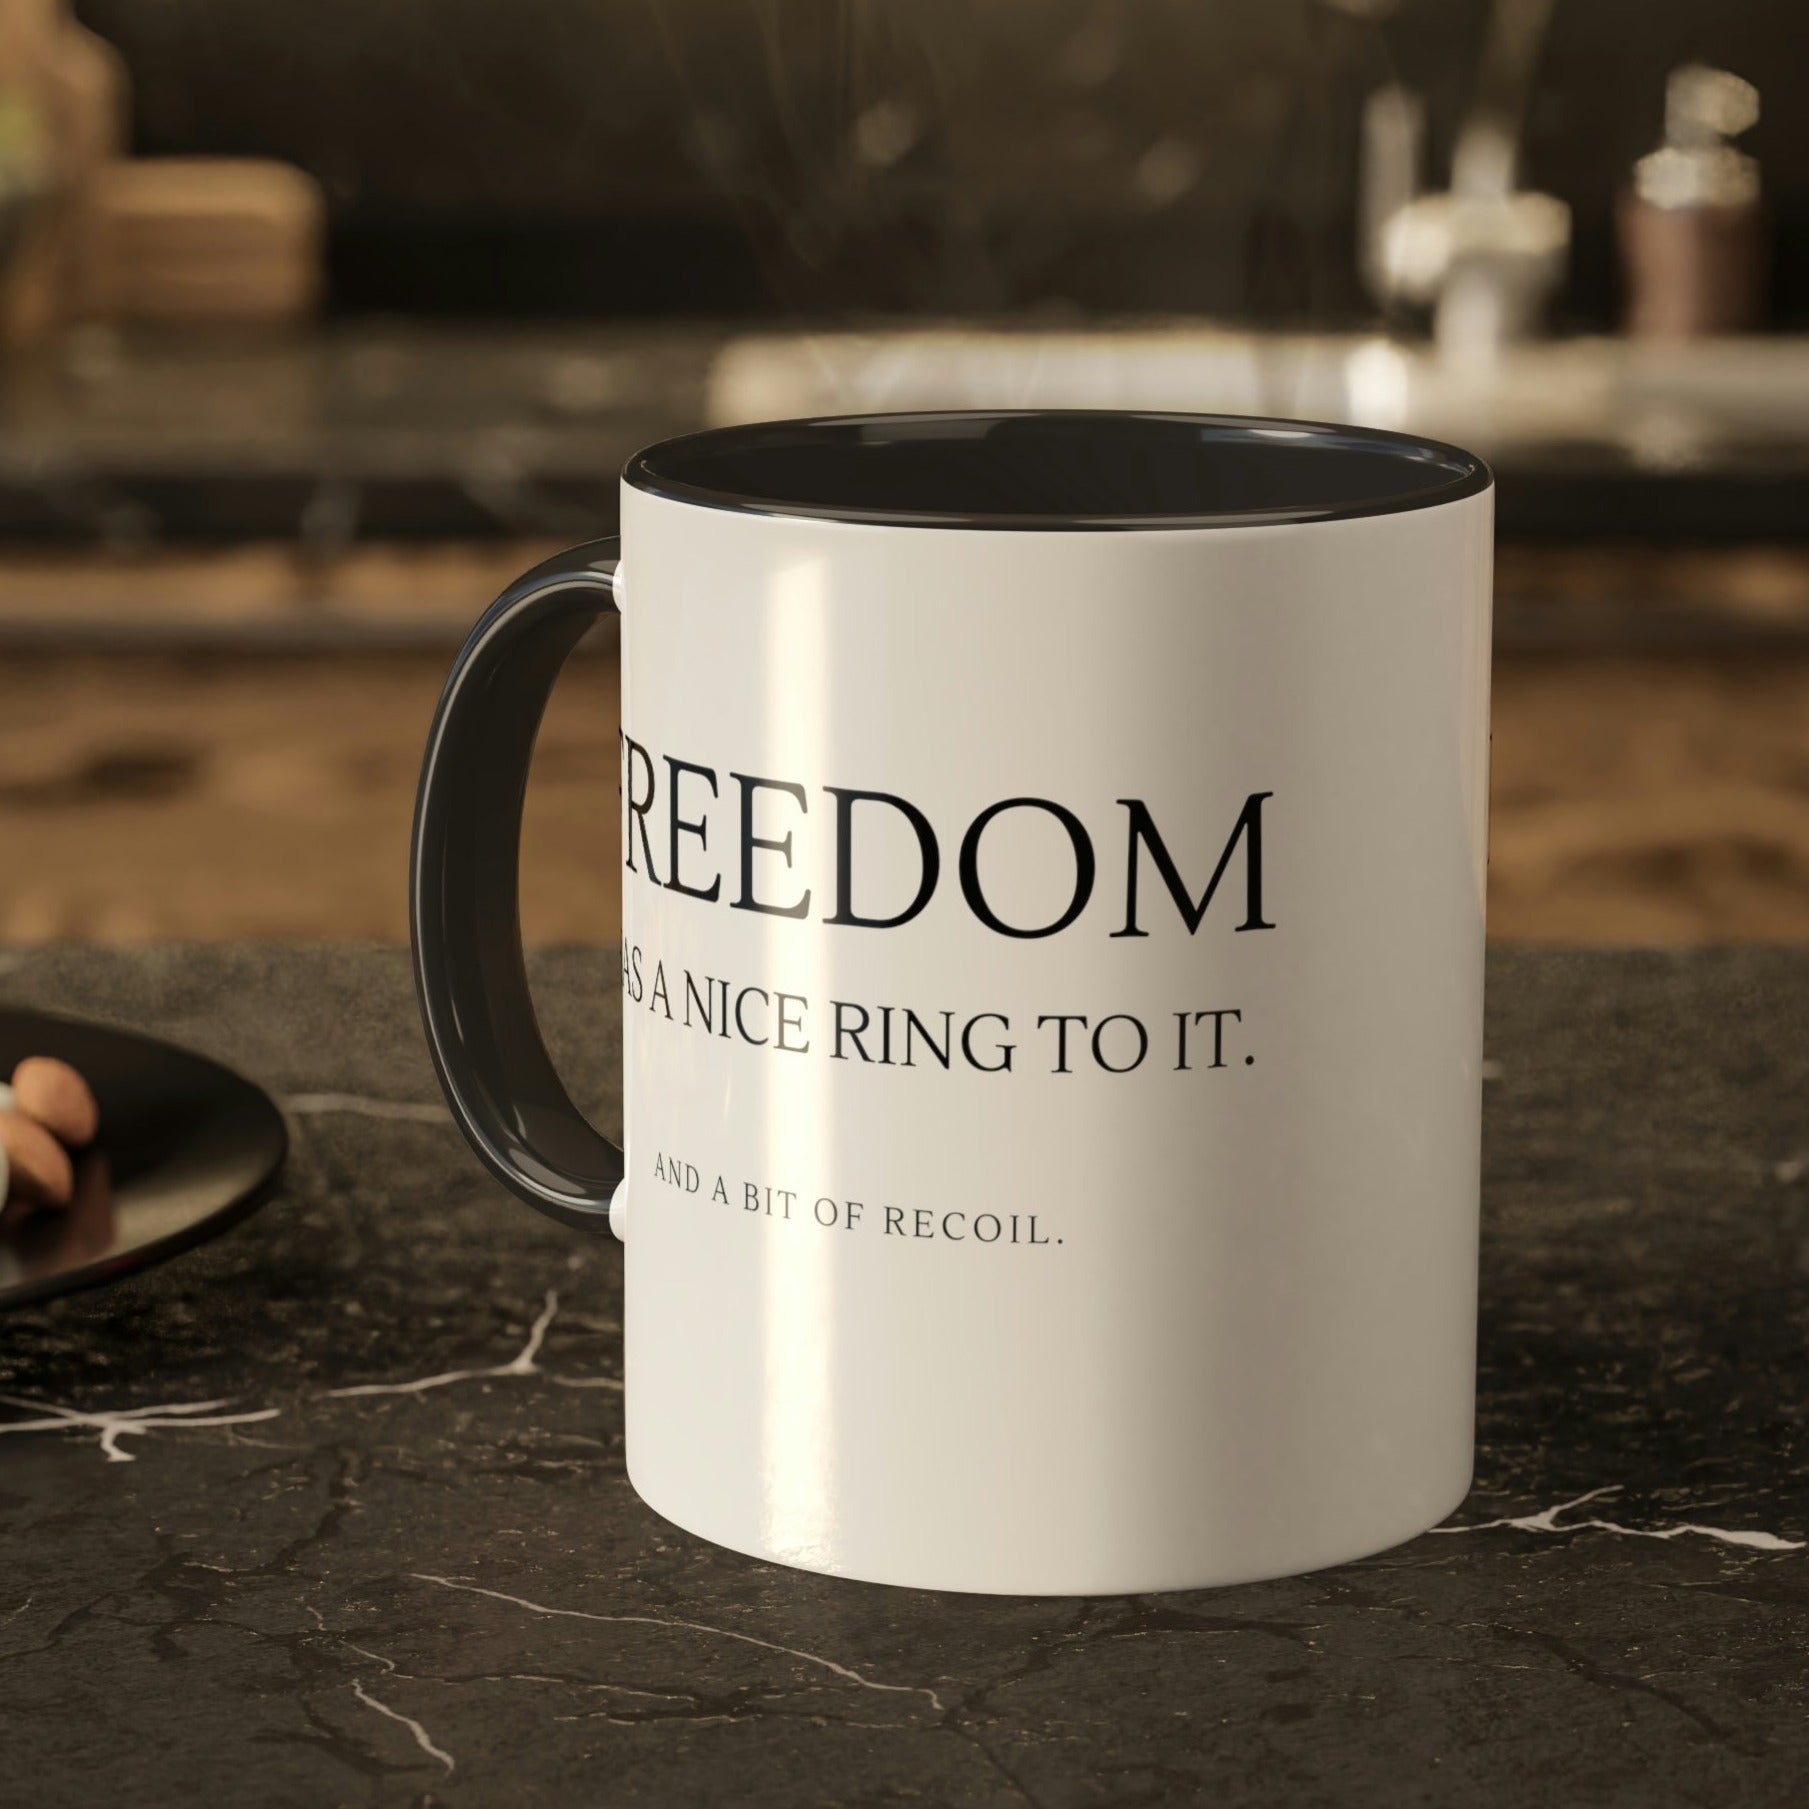 freedom-has-a-nice-ring-to-it-and-a-bit-of-recoil-glossy-mug-11-oz-2a-mockup-on-a-wooden-table